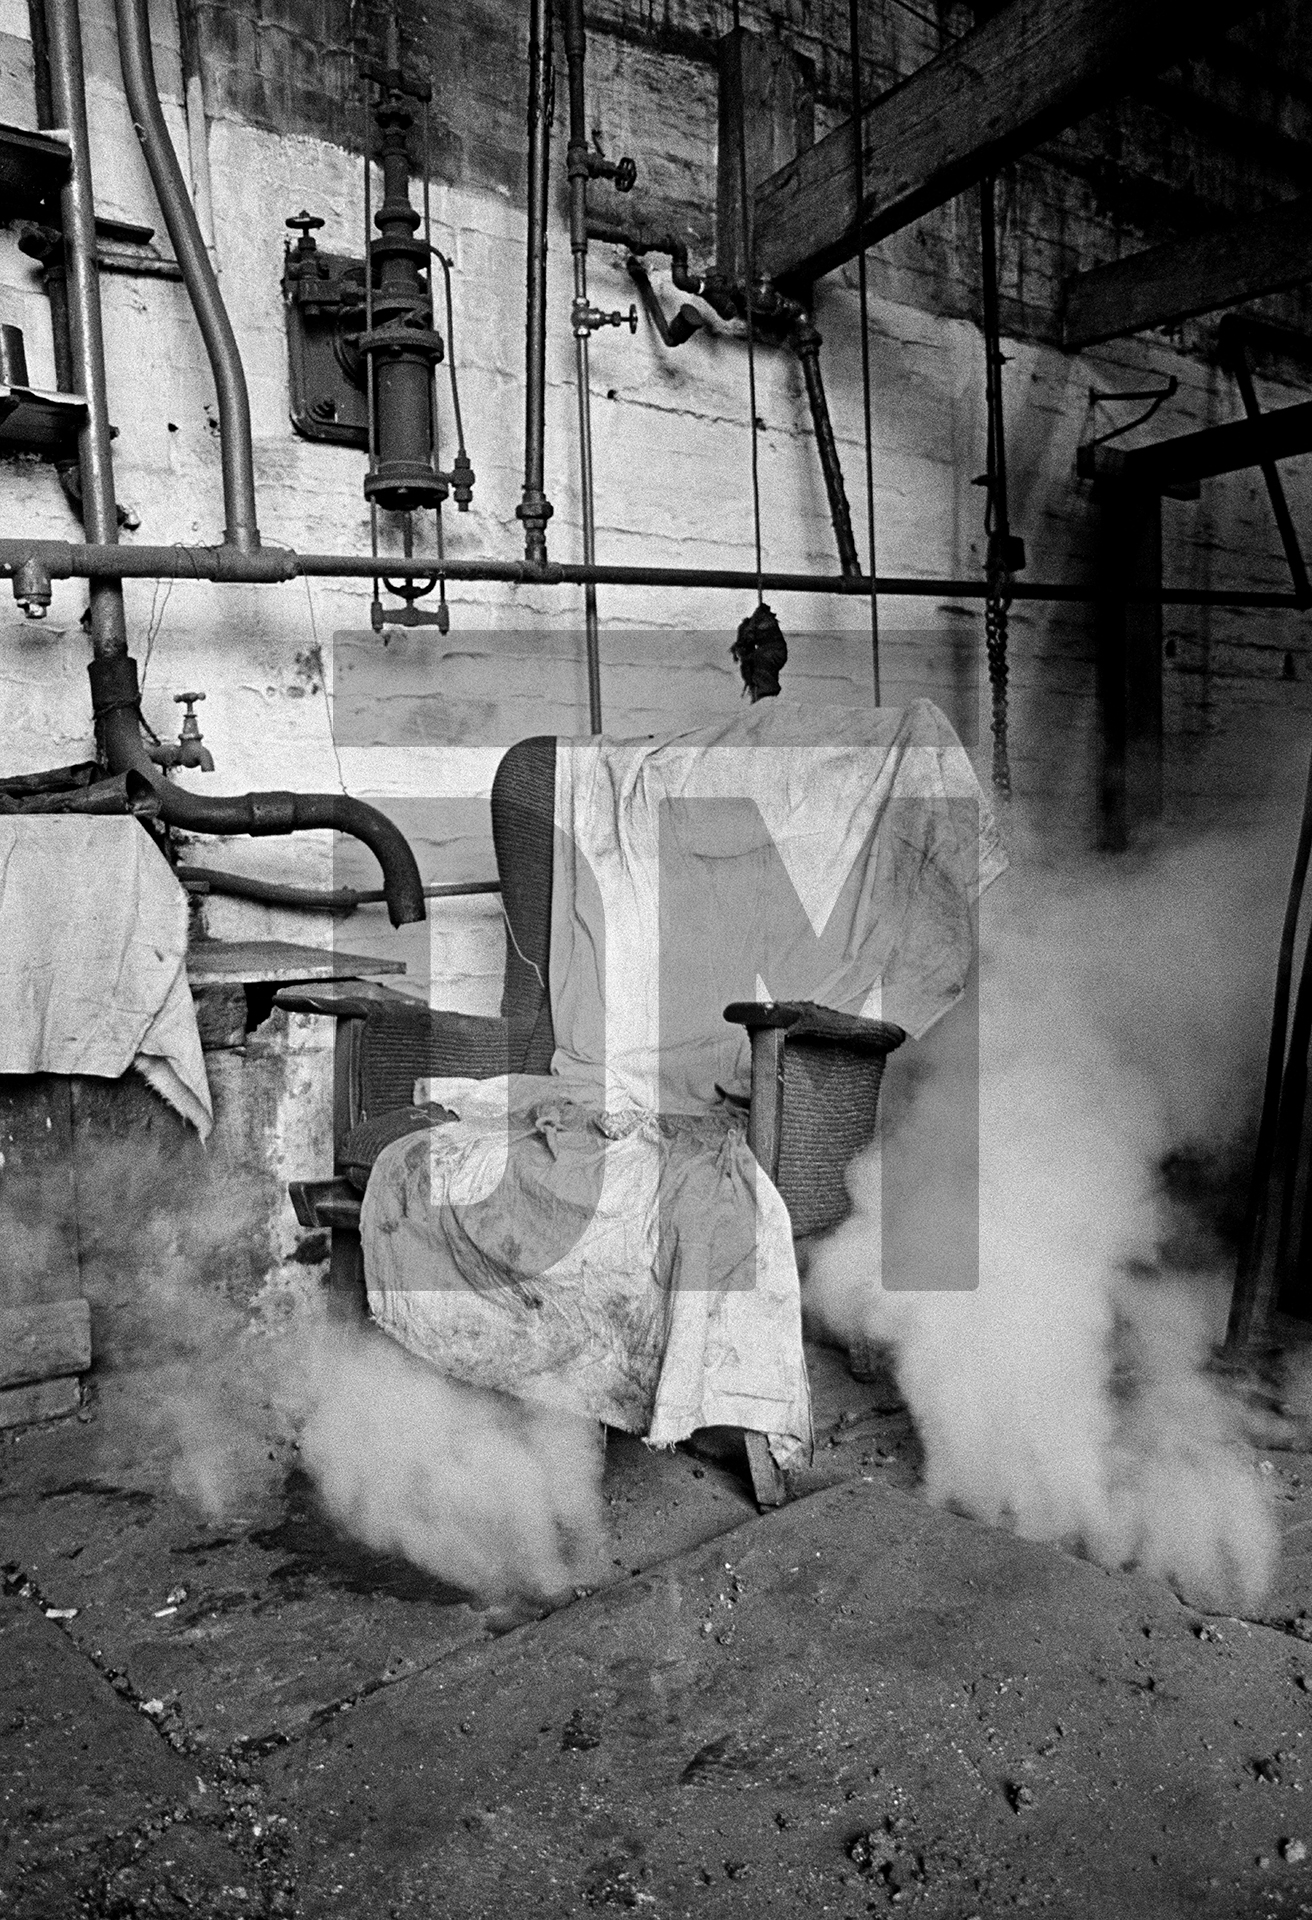 Boiler tenter’s (‘fire-beater’s’) chair during ‘blowing down’ of the Lancashire boiler (emptying it) ready for fluing. Wakes holiday, July 1976 by Daniel Meadows